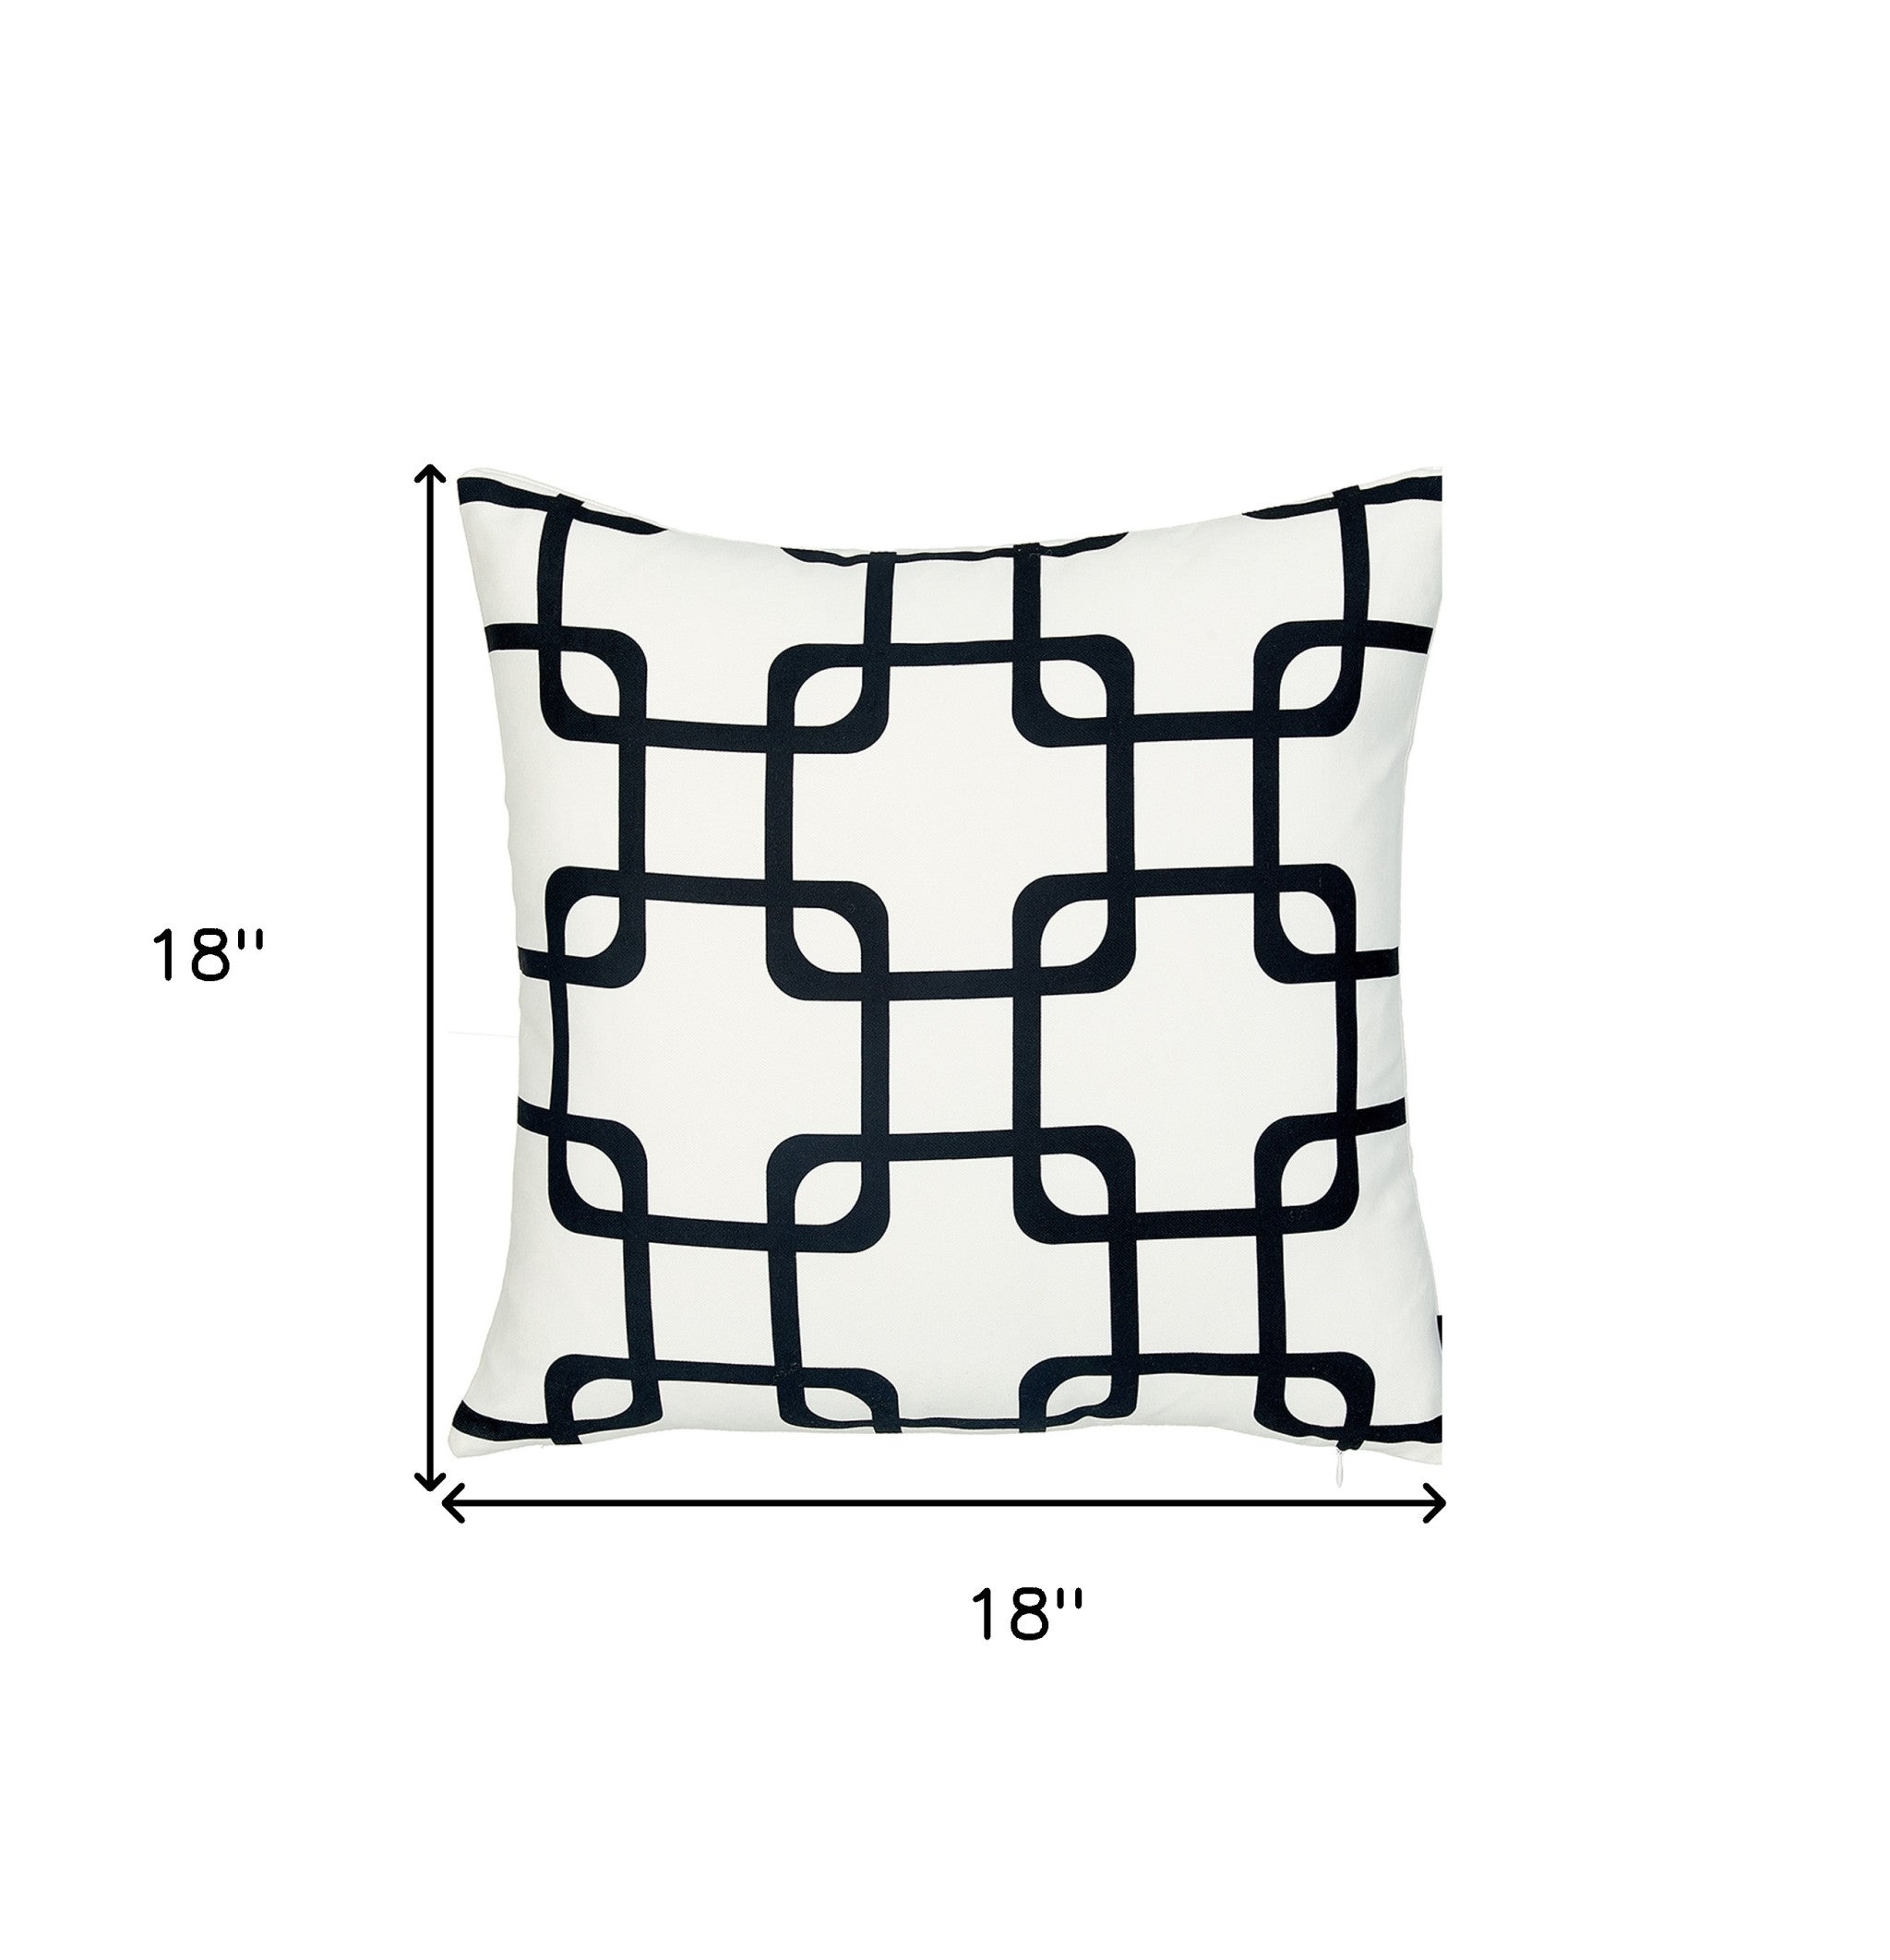 Black And White Geometric Squares Decorative Throw Pillow Cover